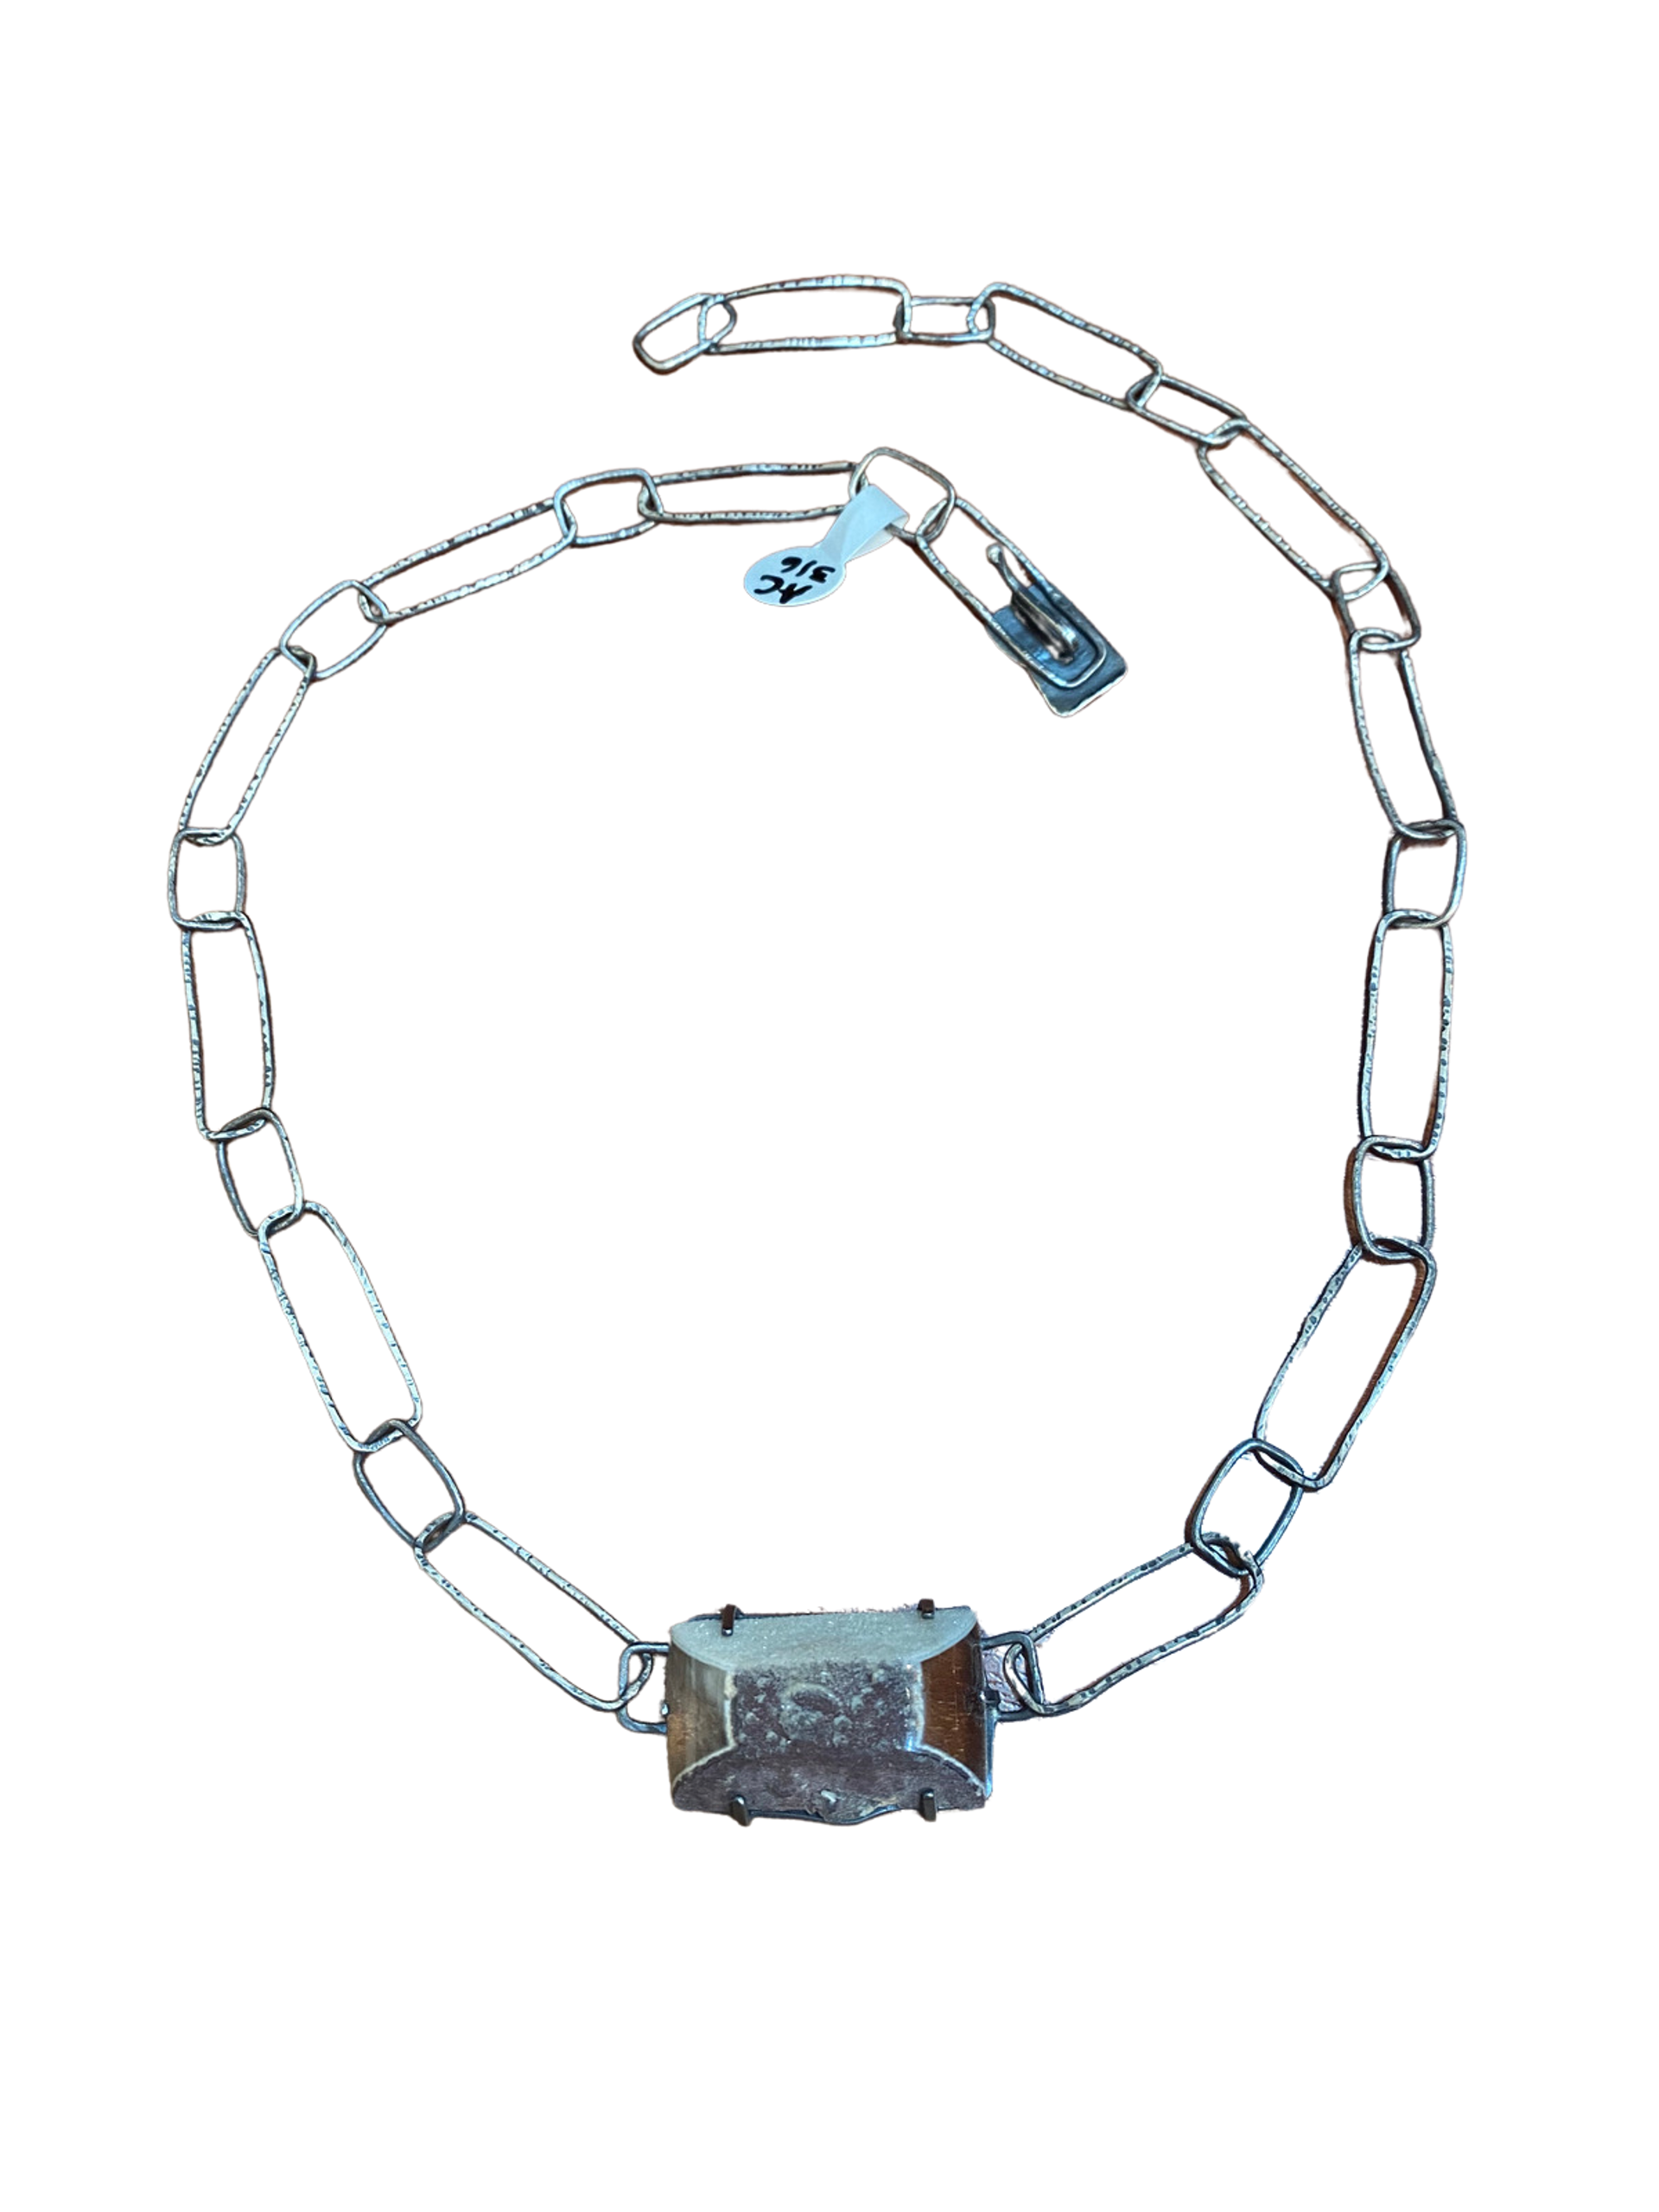 Necklace - Mongolian Quartz Crystal AC 316 by Annette Campbell